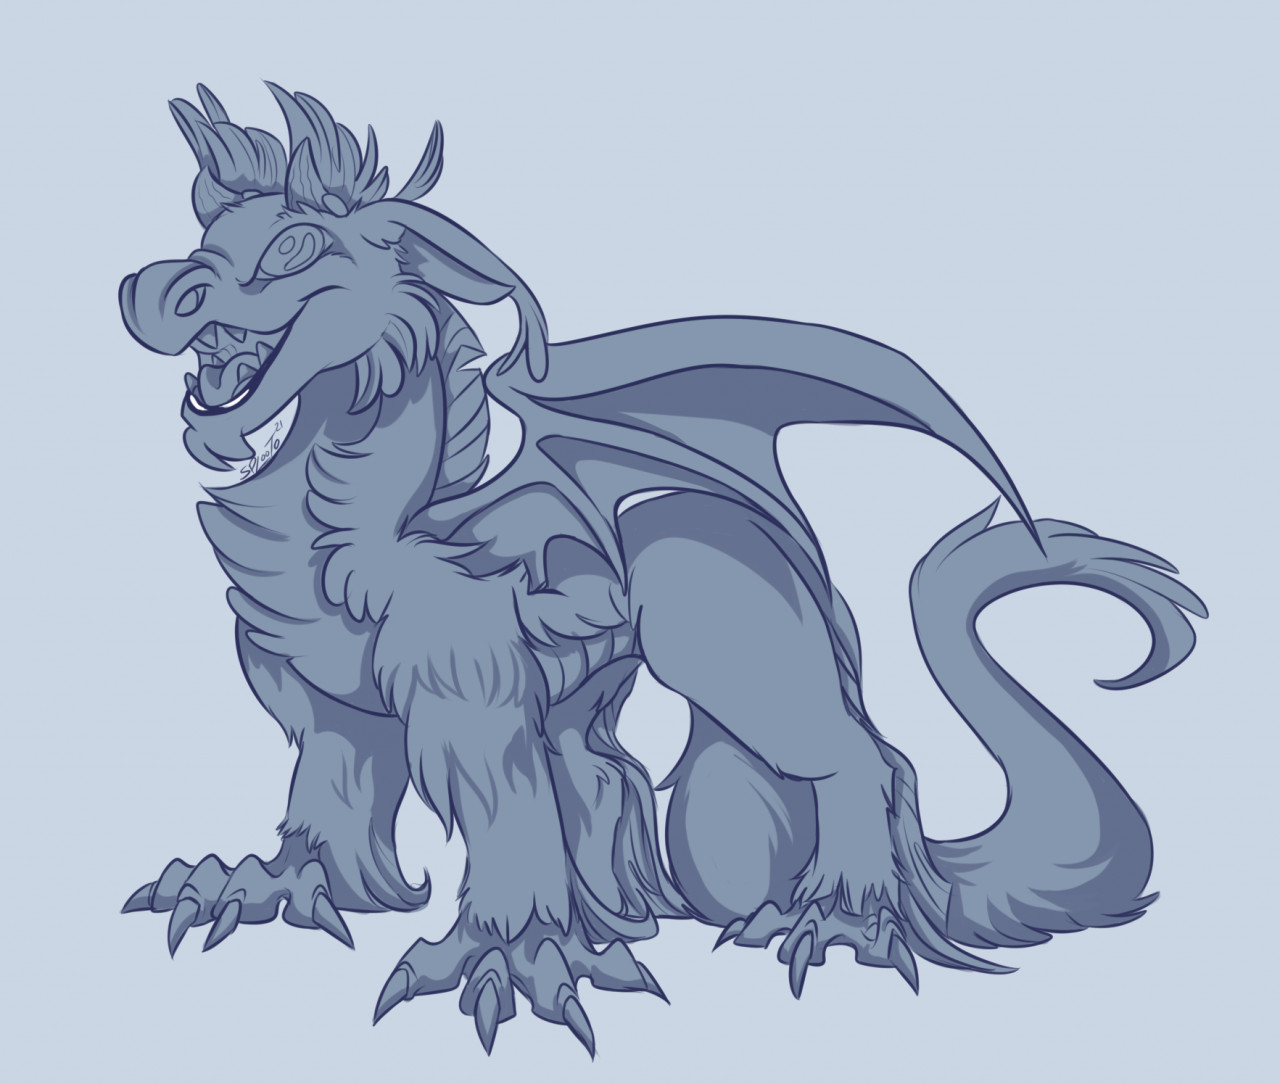 Sketch dragon by Bazted -- Fur Affinity [dot] net